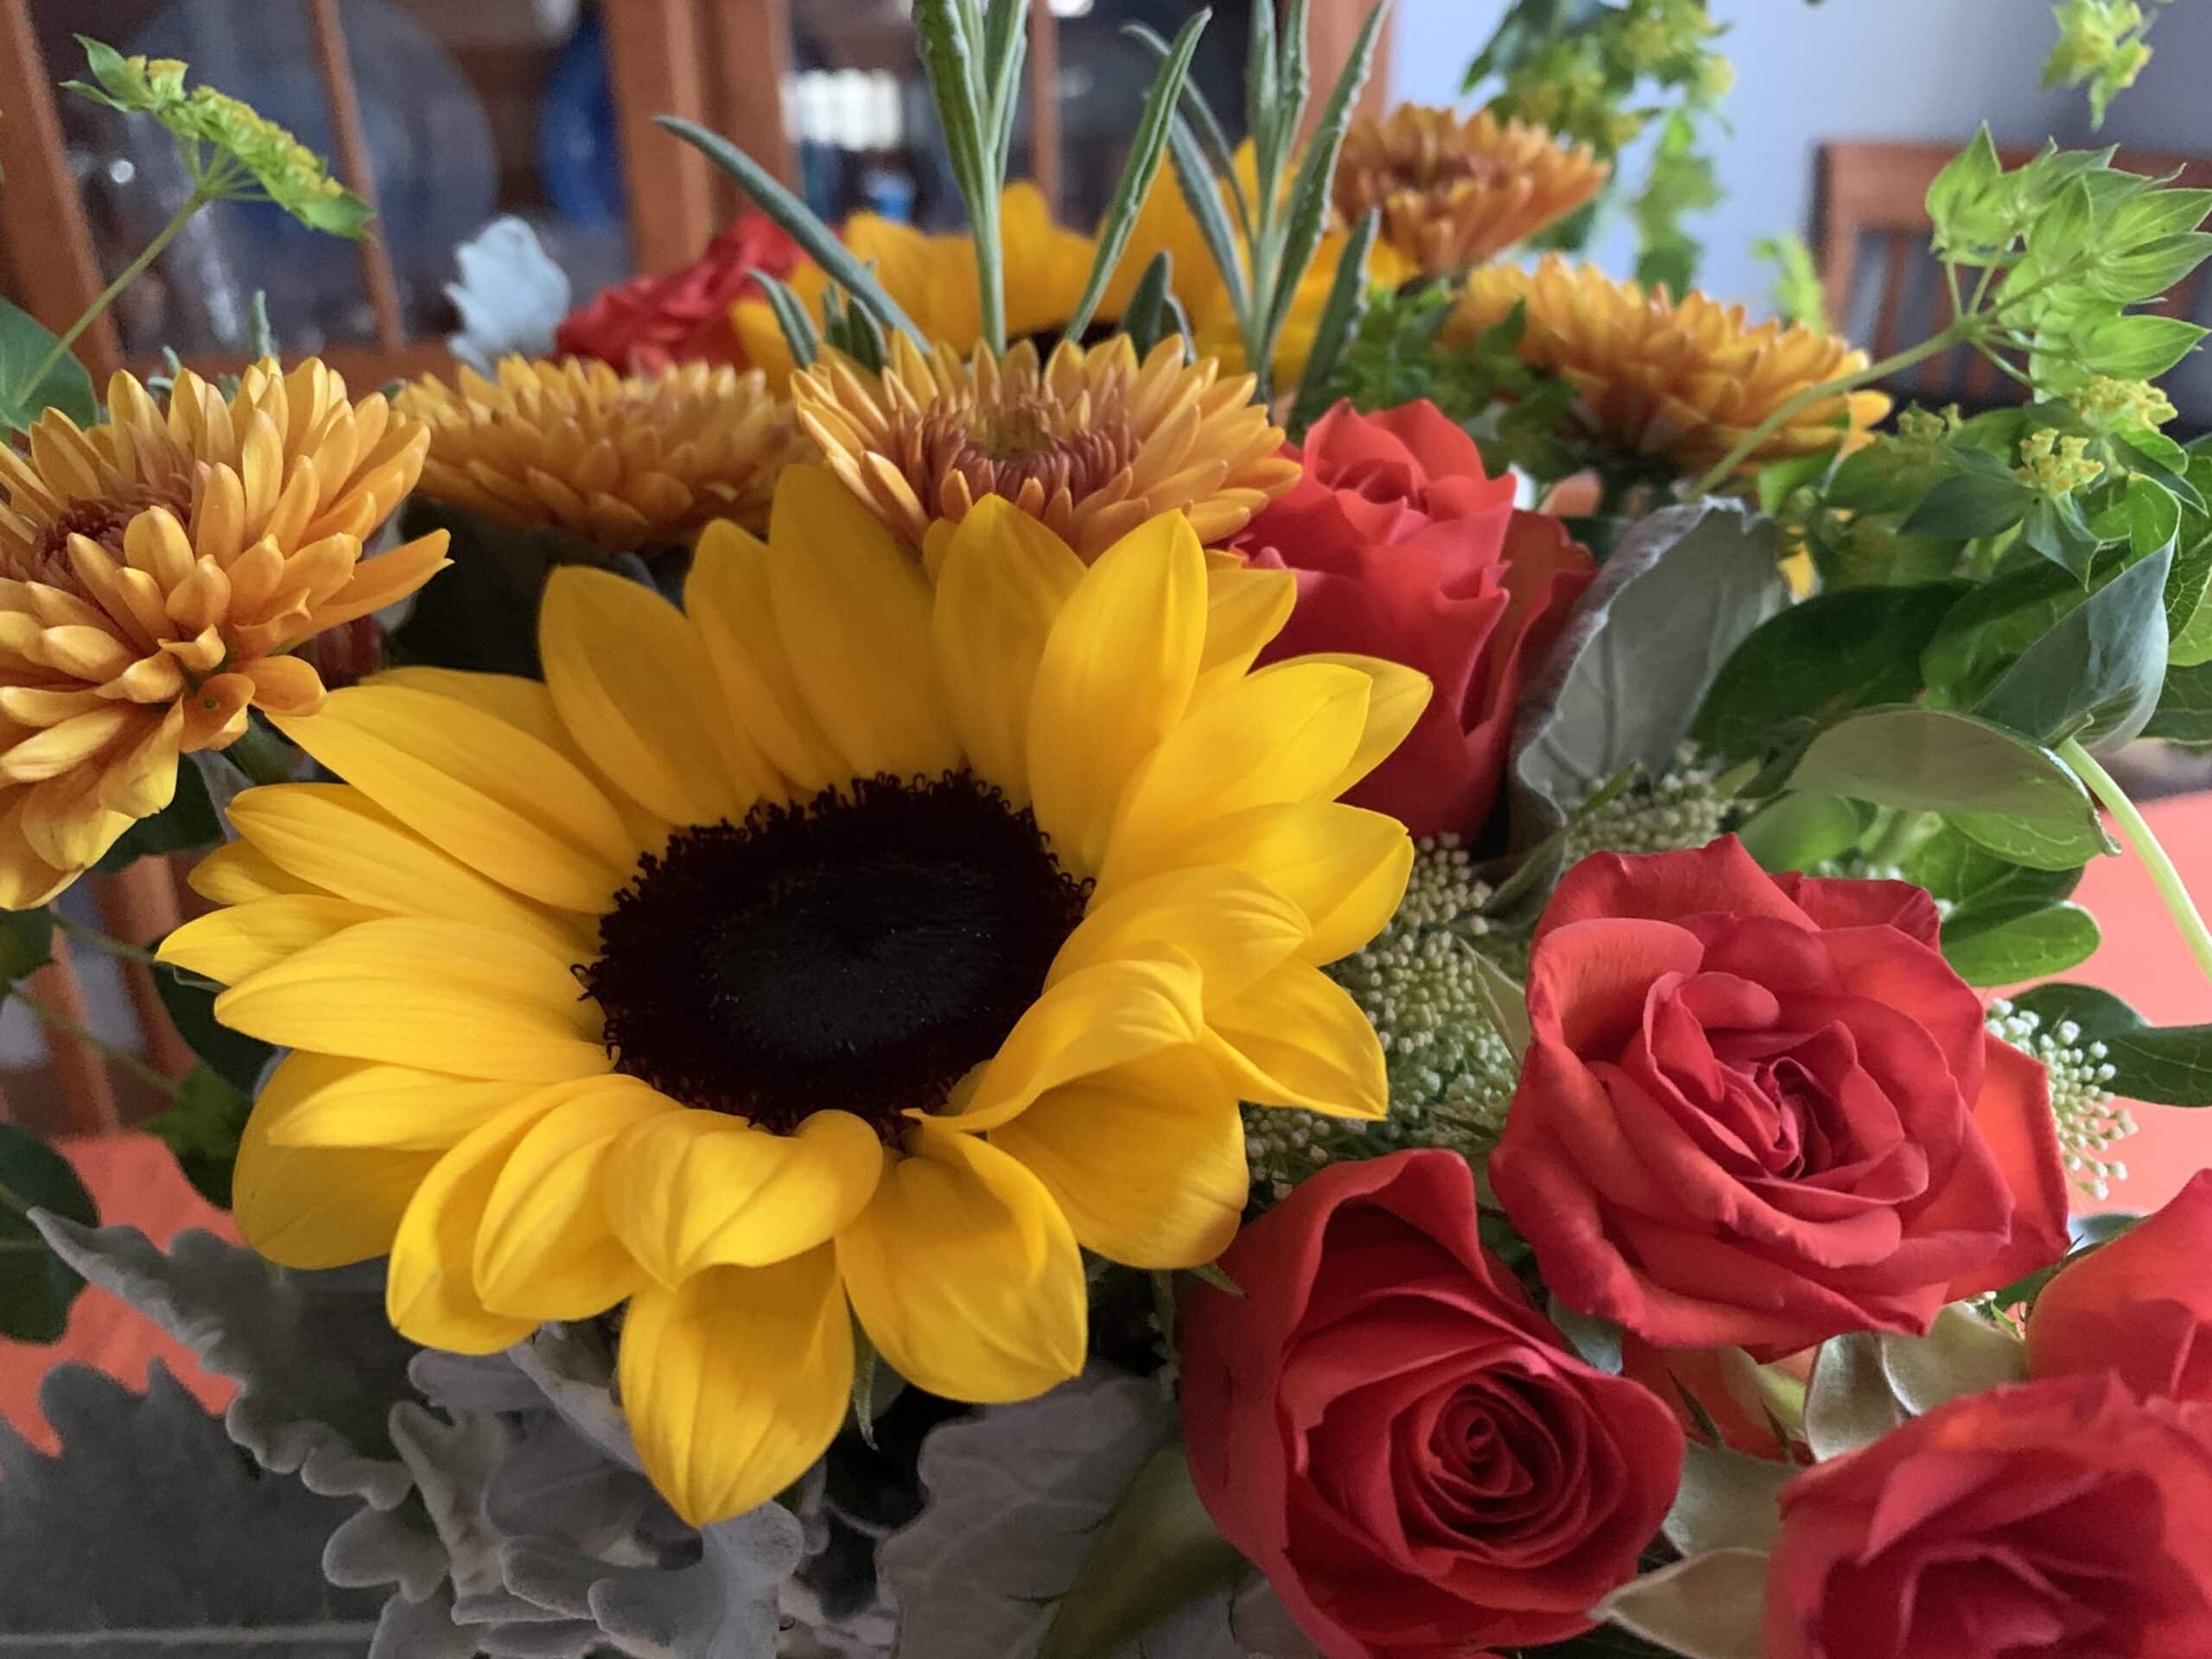 close up image of fall flower bouquet with sunflowers and orange roses